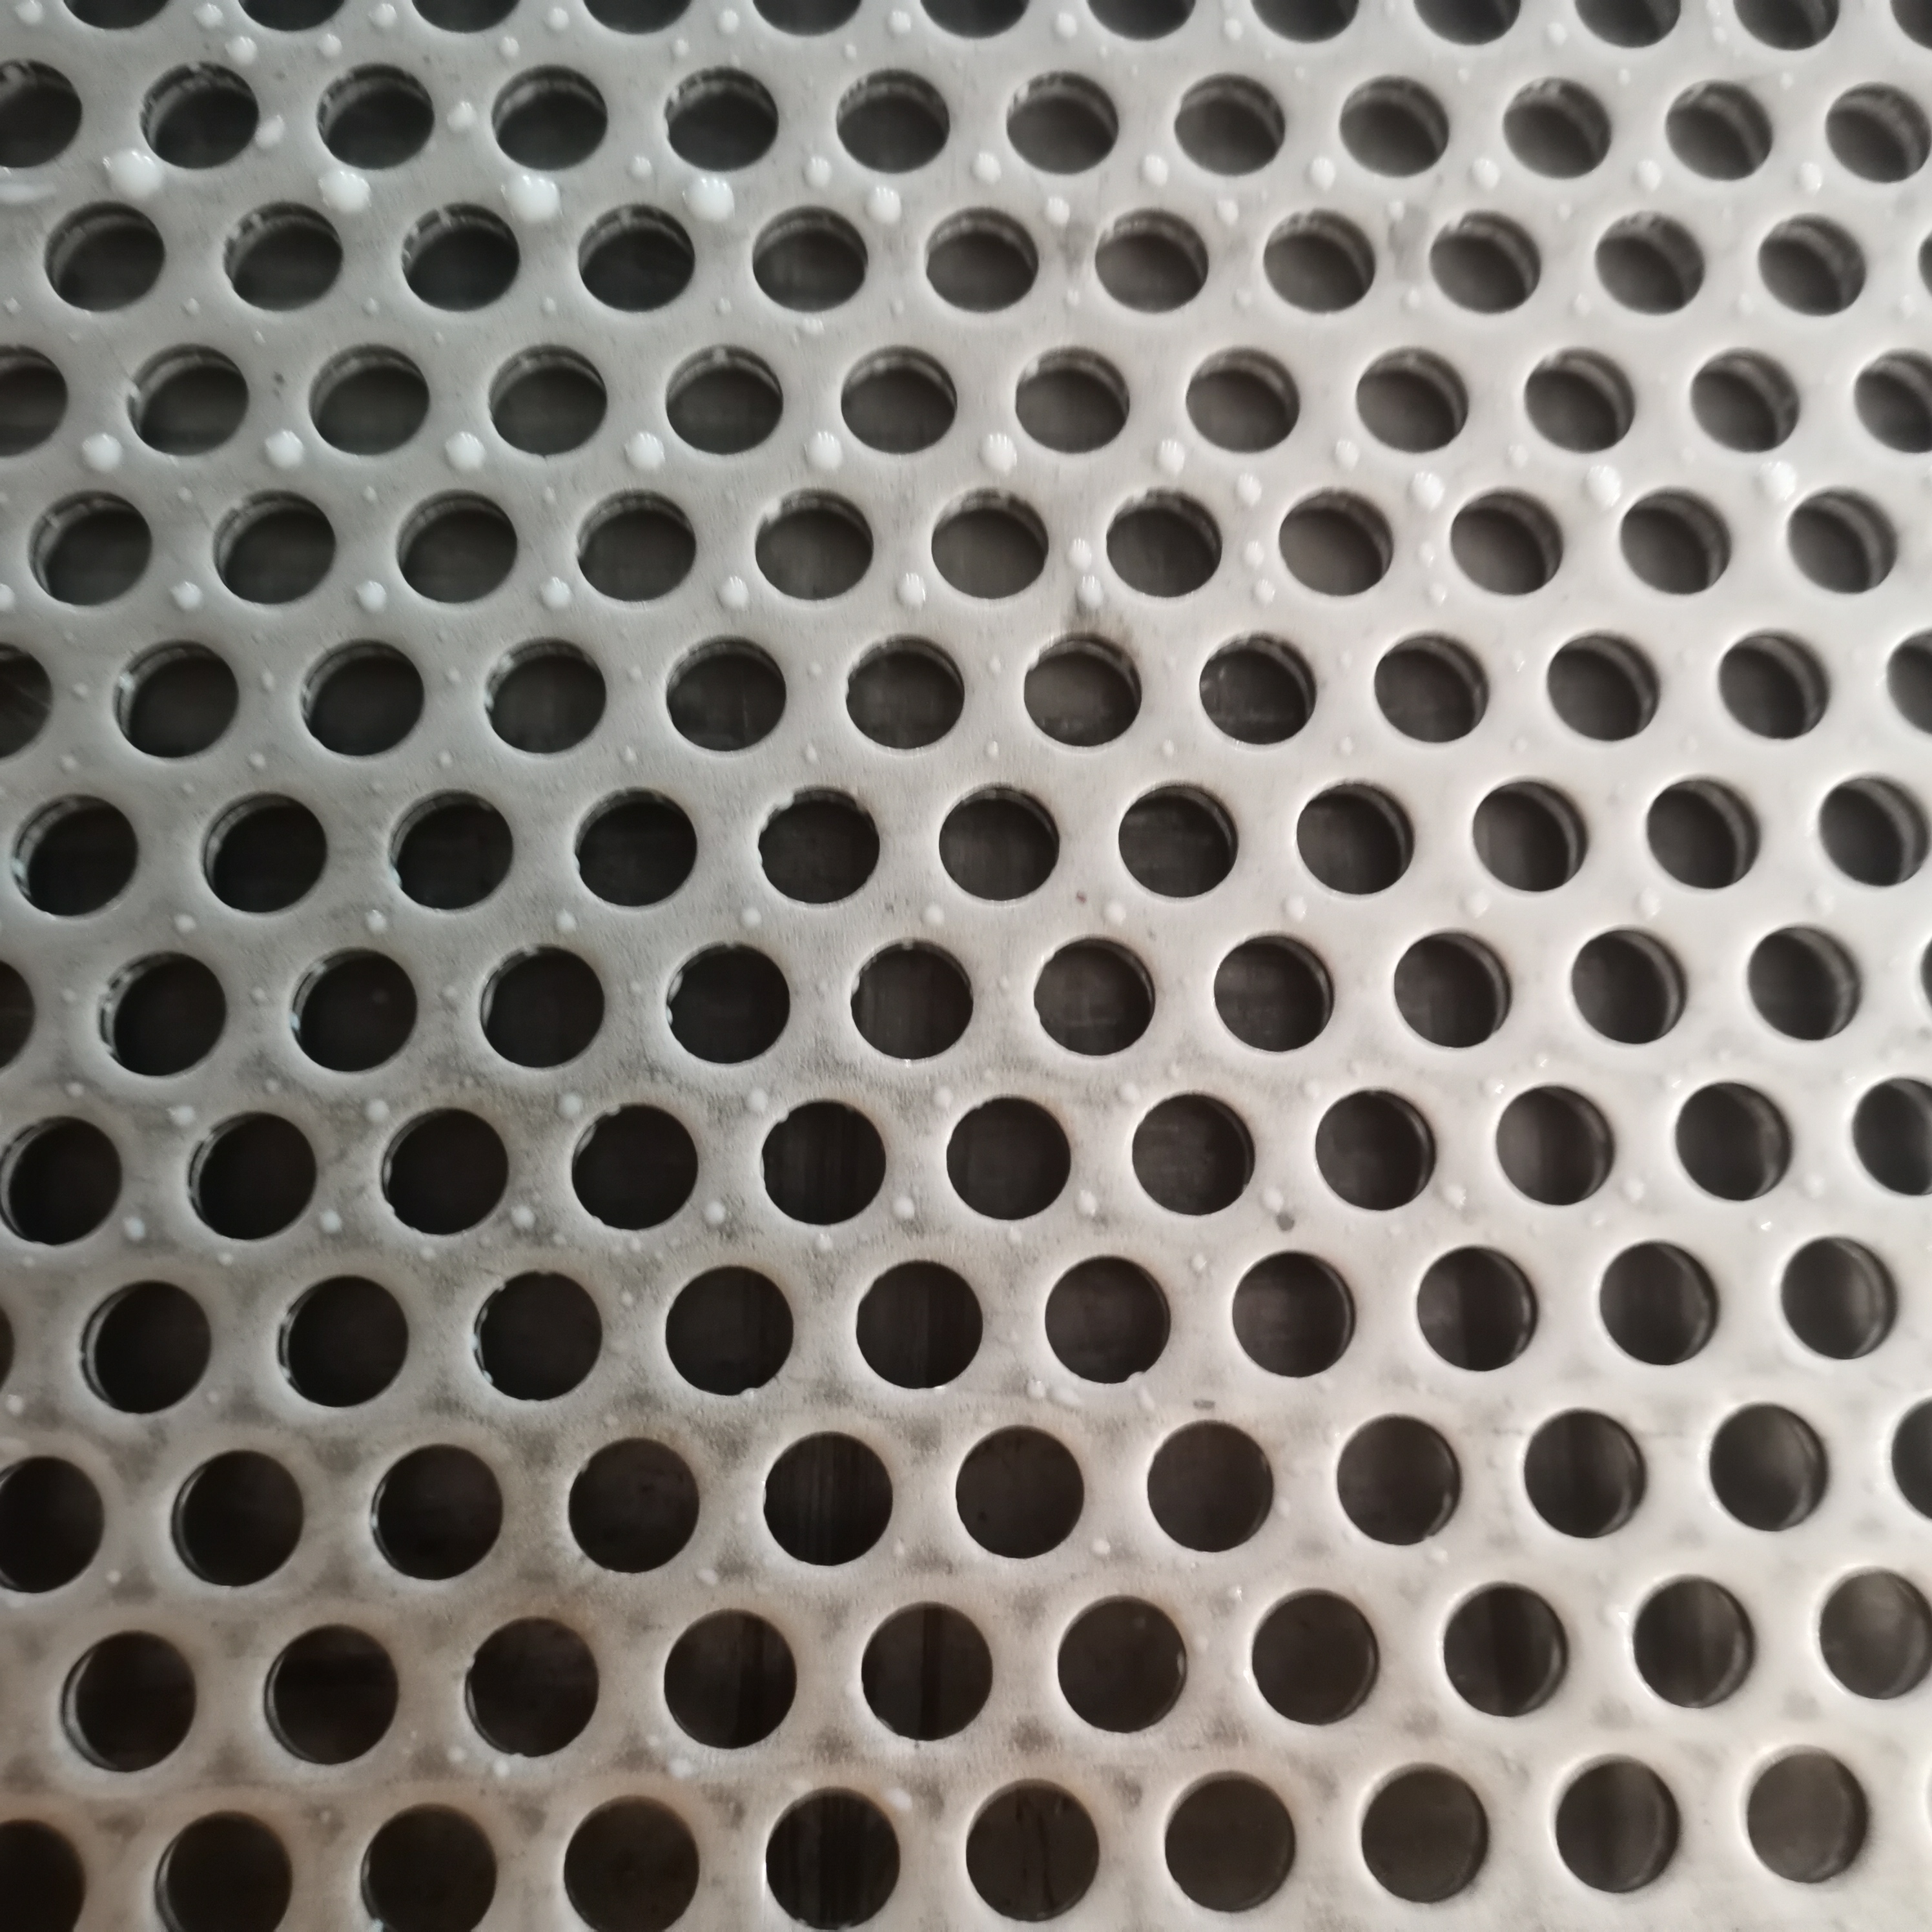 Introduction of stainless steel perforated mesh